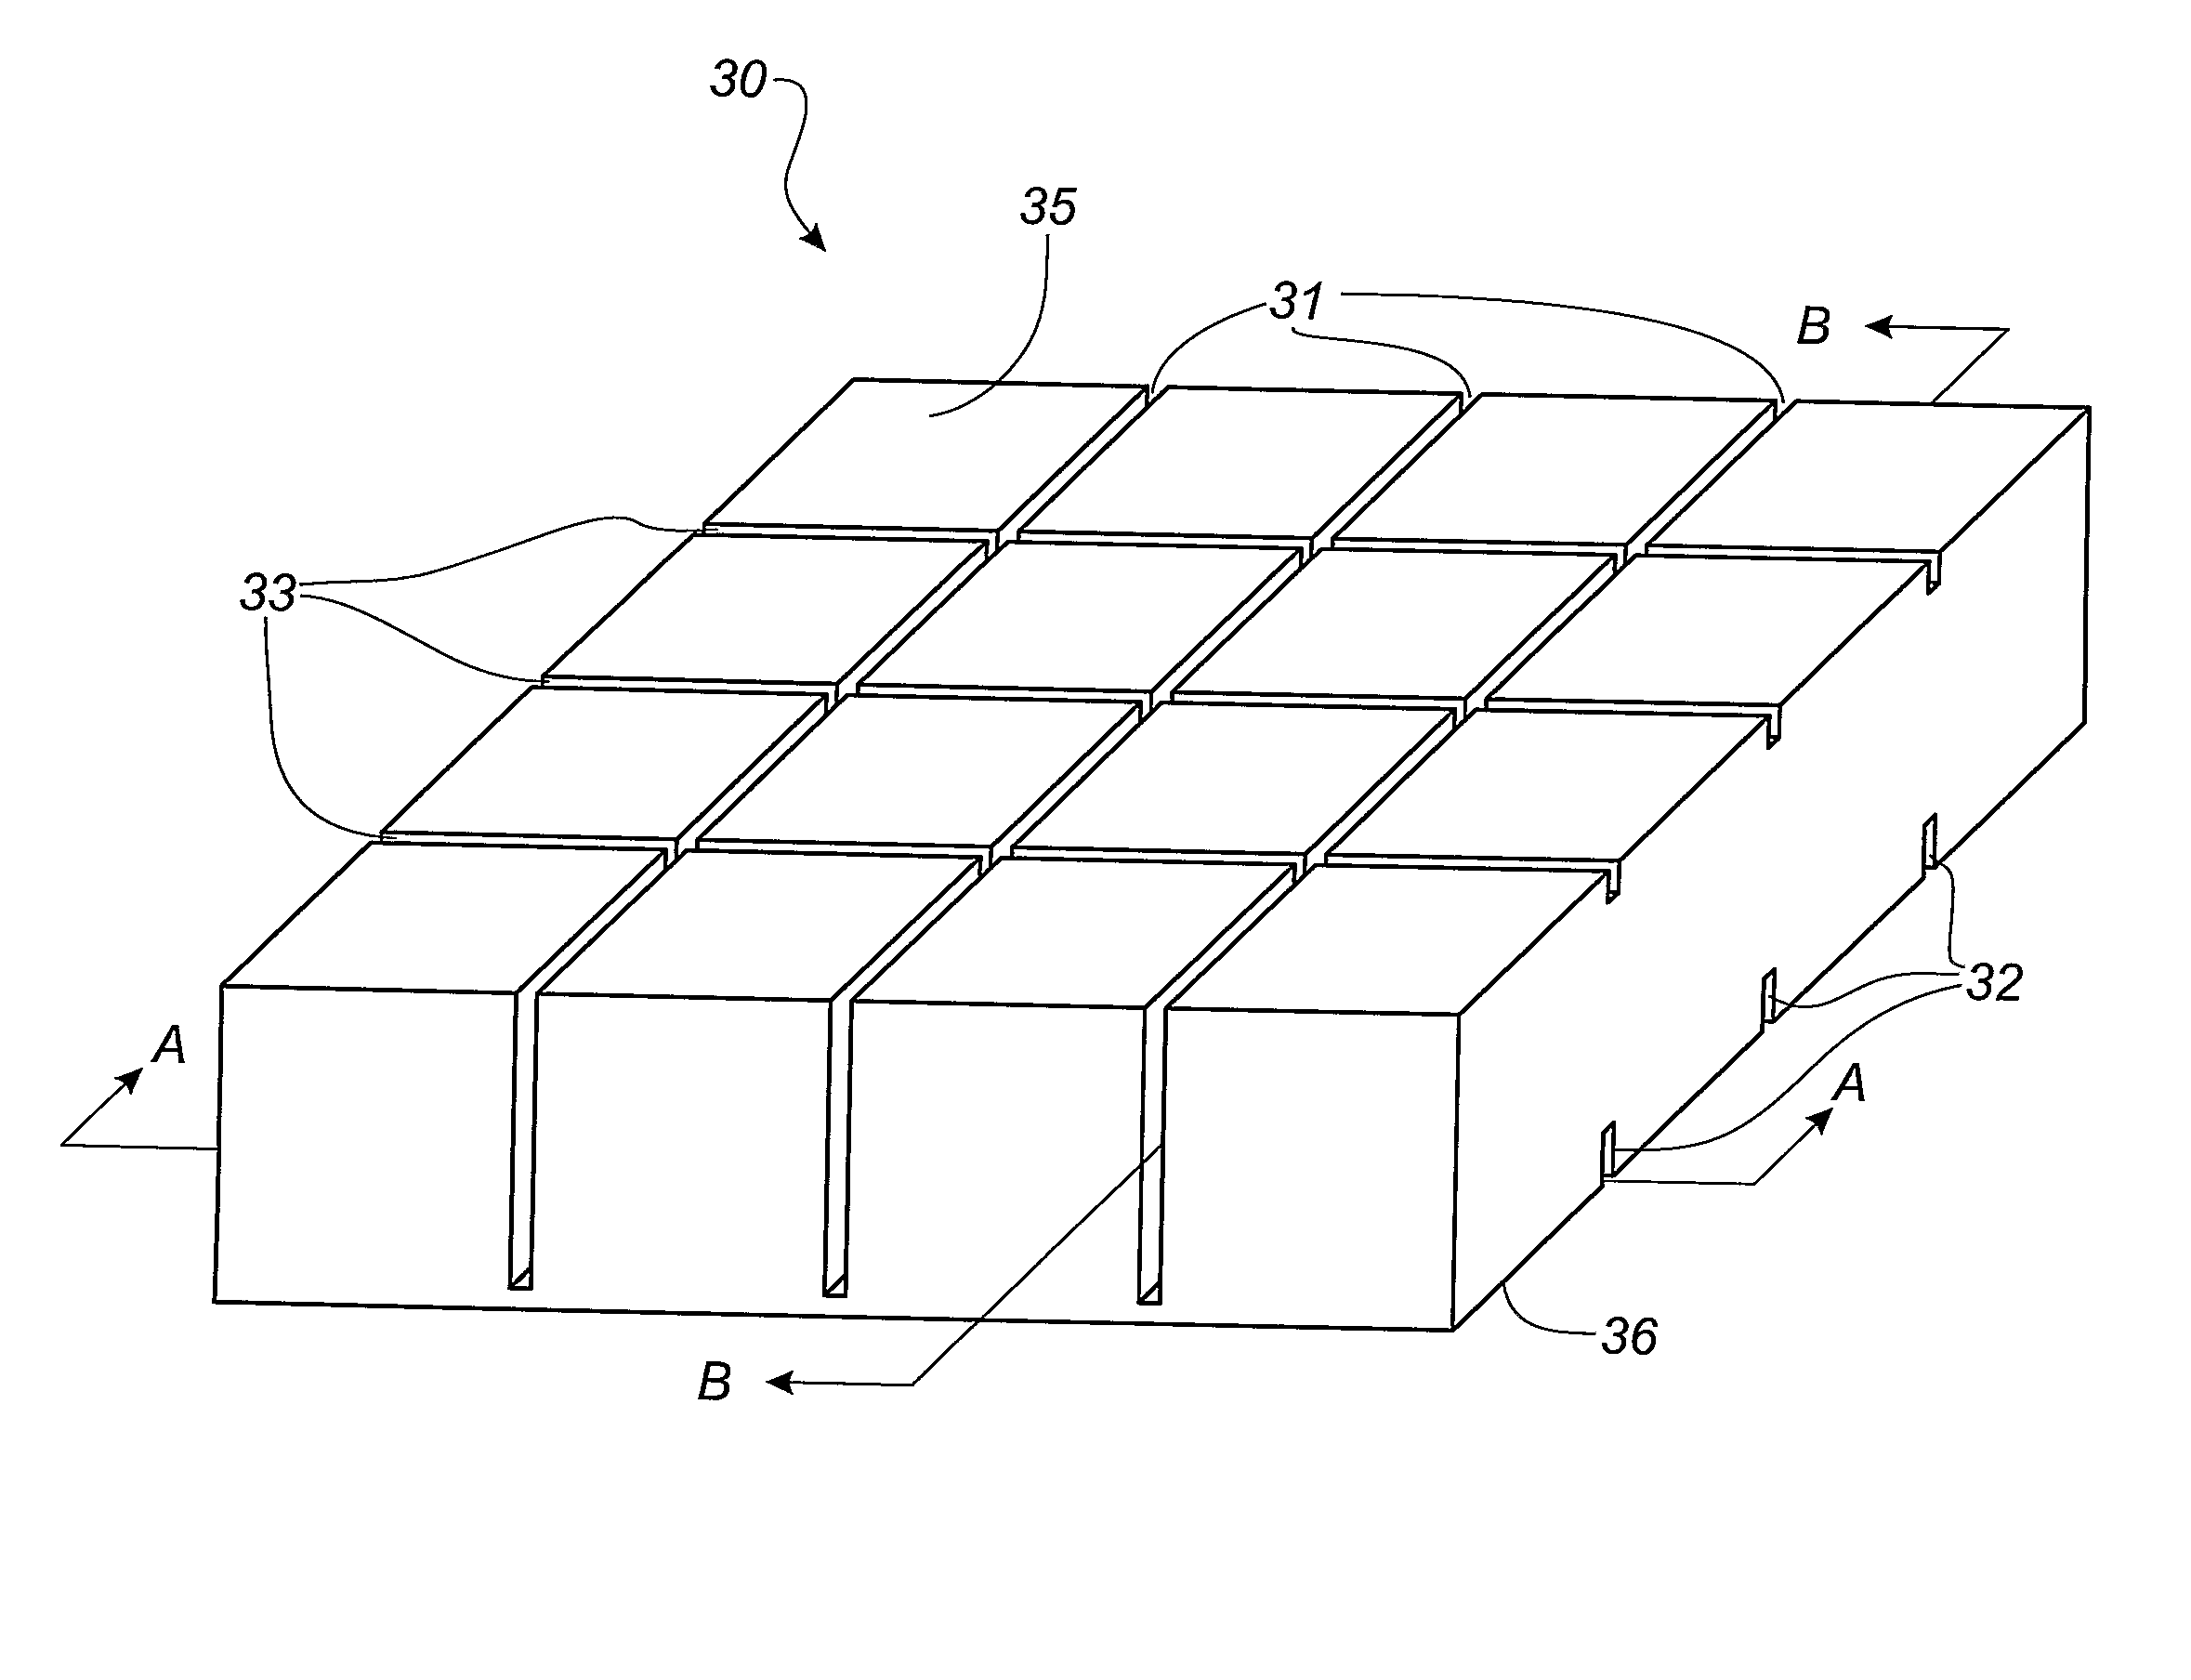 Method of using a formable core block for a resin impregnation process